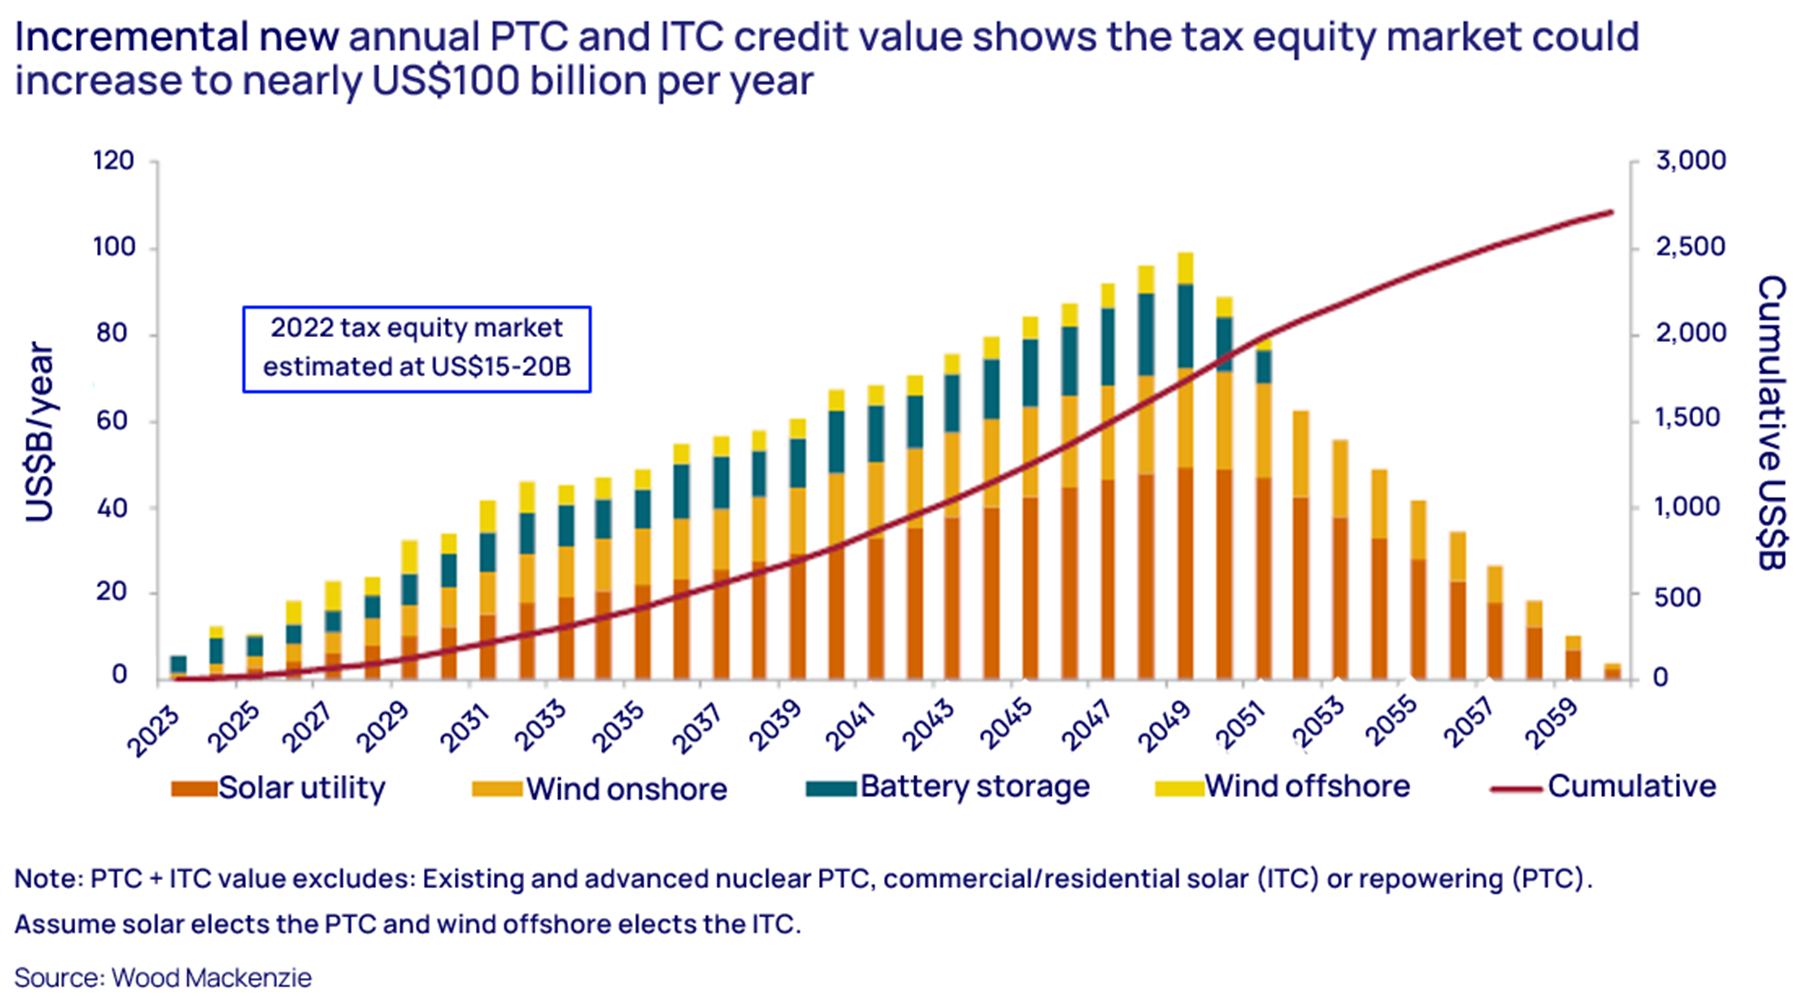 Incremental new annual PTC and ITC credit value shows the tax equity market could increase to nearly US$100 billion per year 